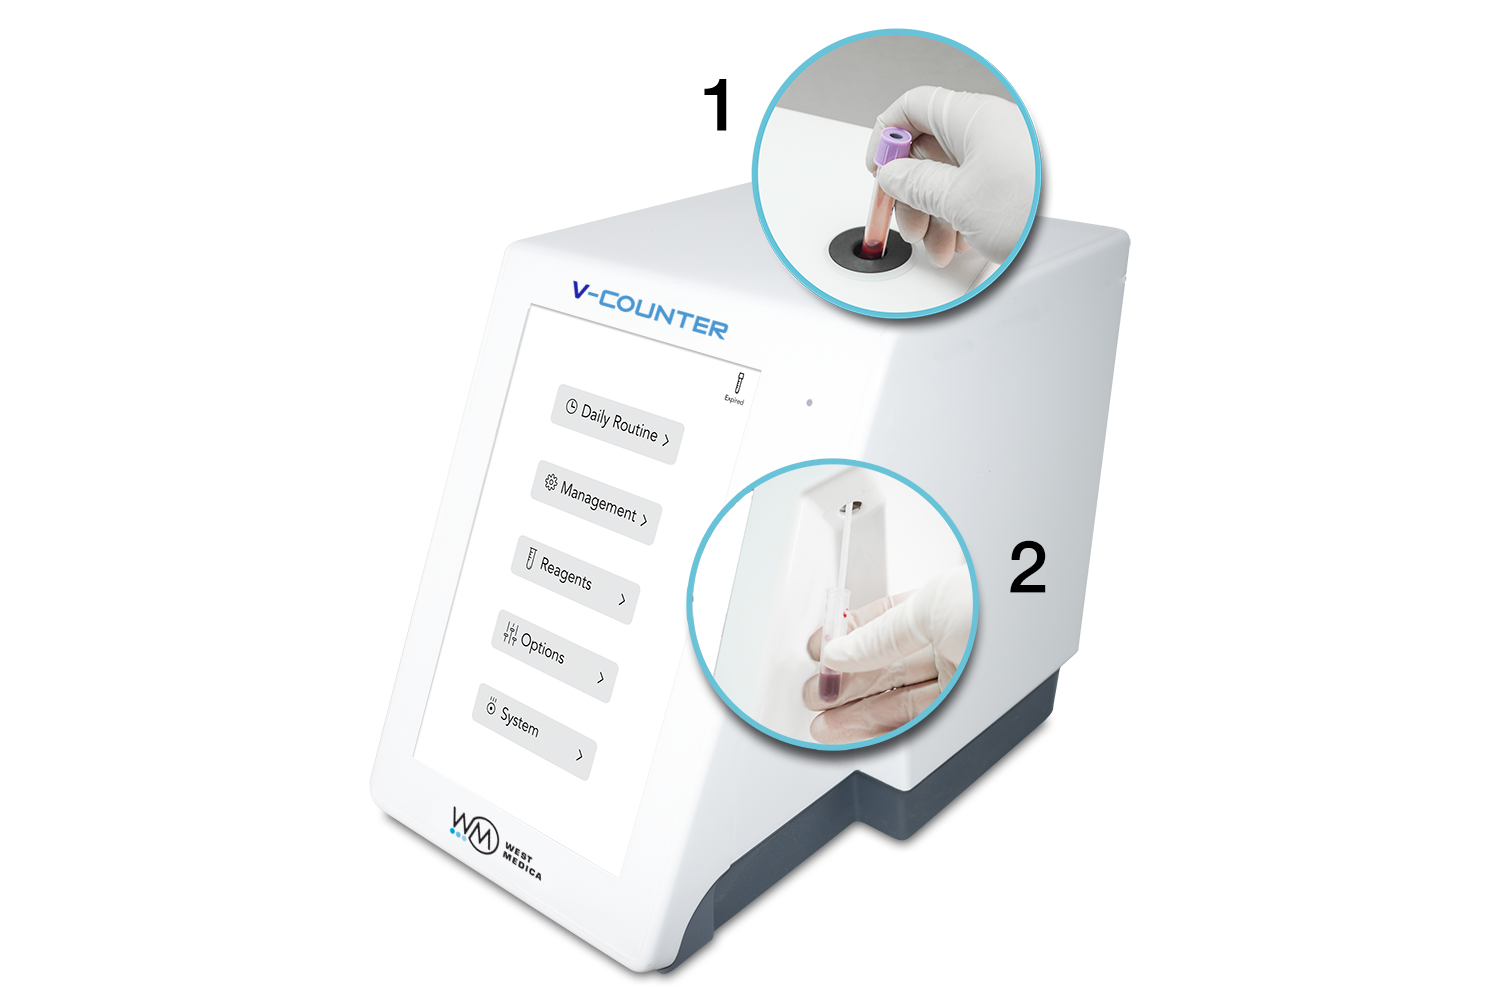 V-Counter operates with any type of closed and open EDTA test-tubes